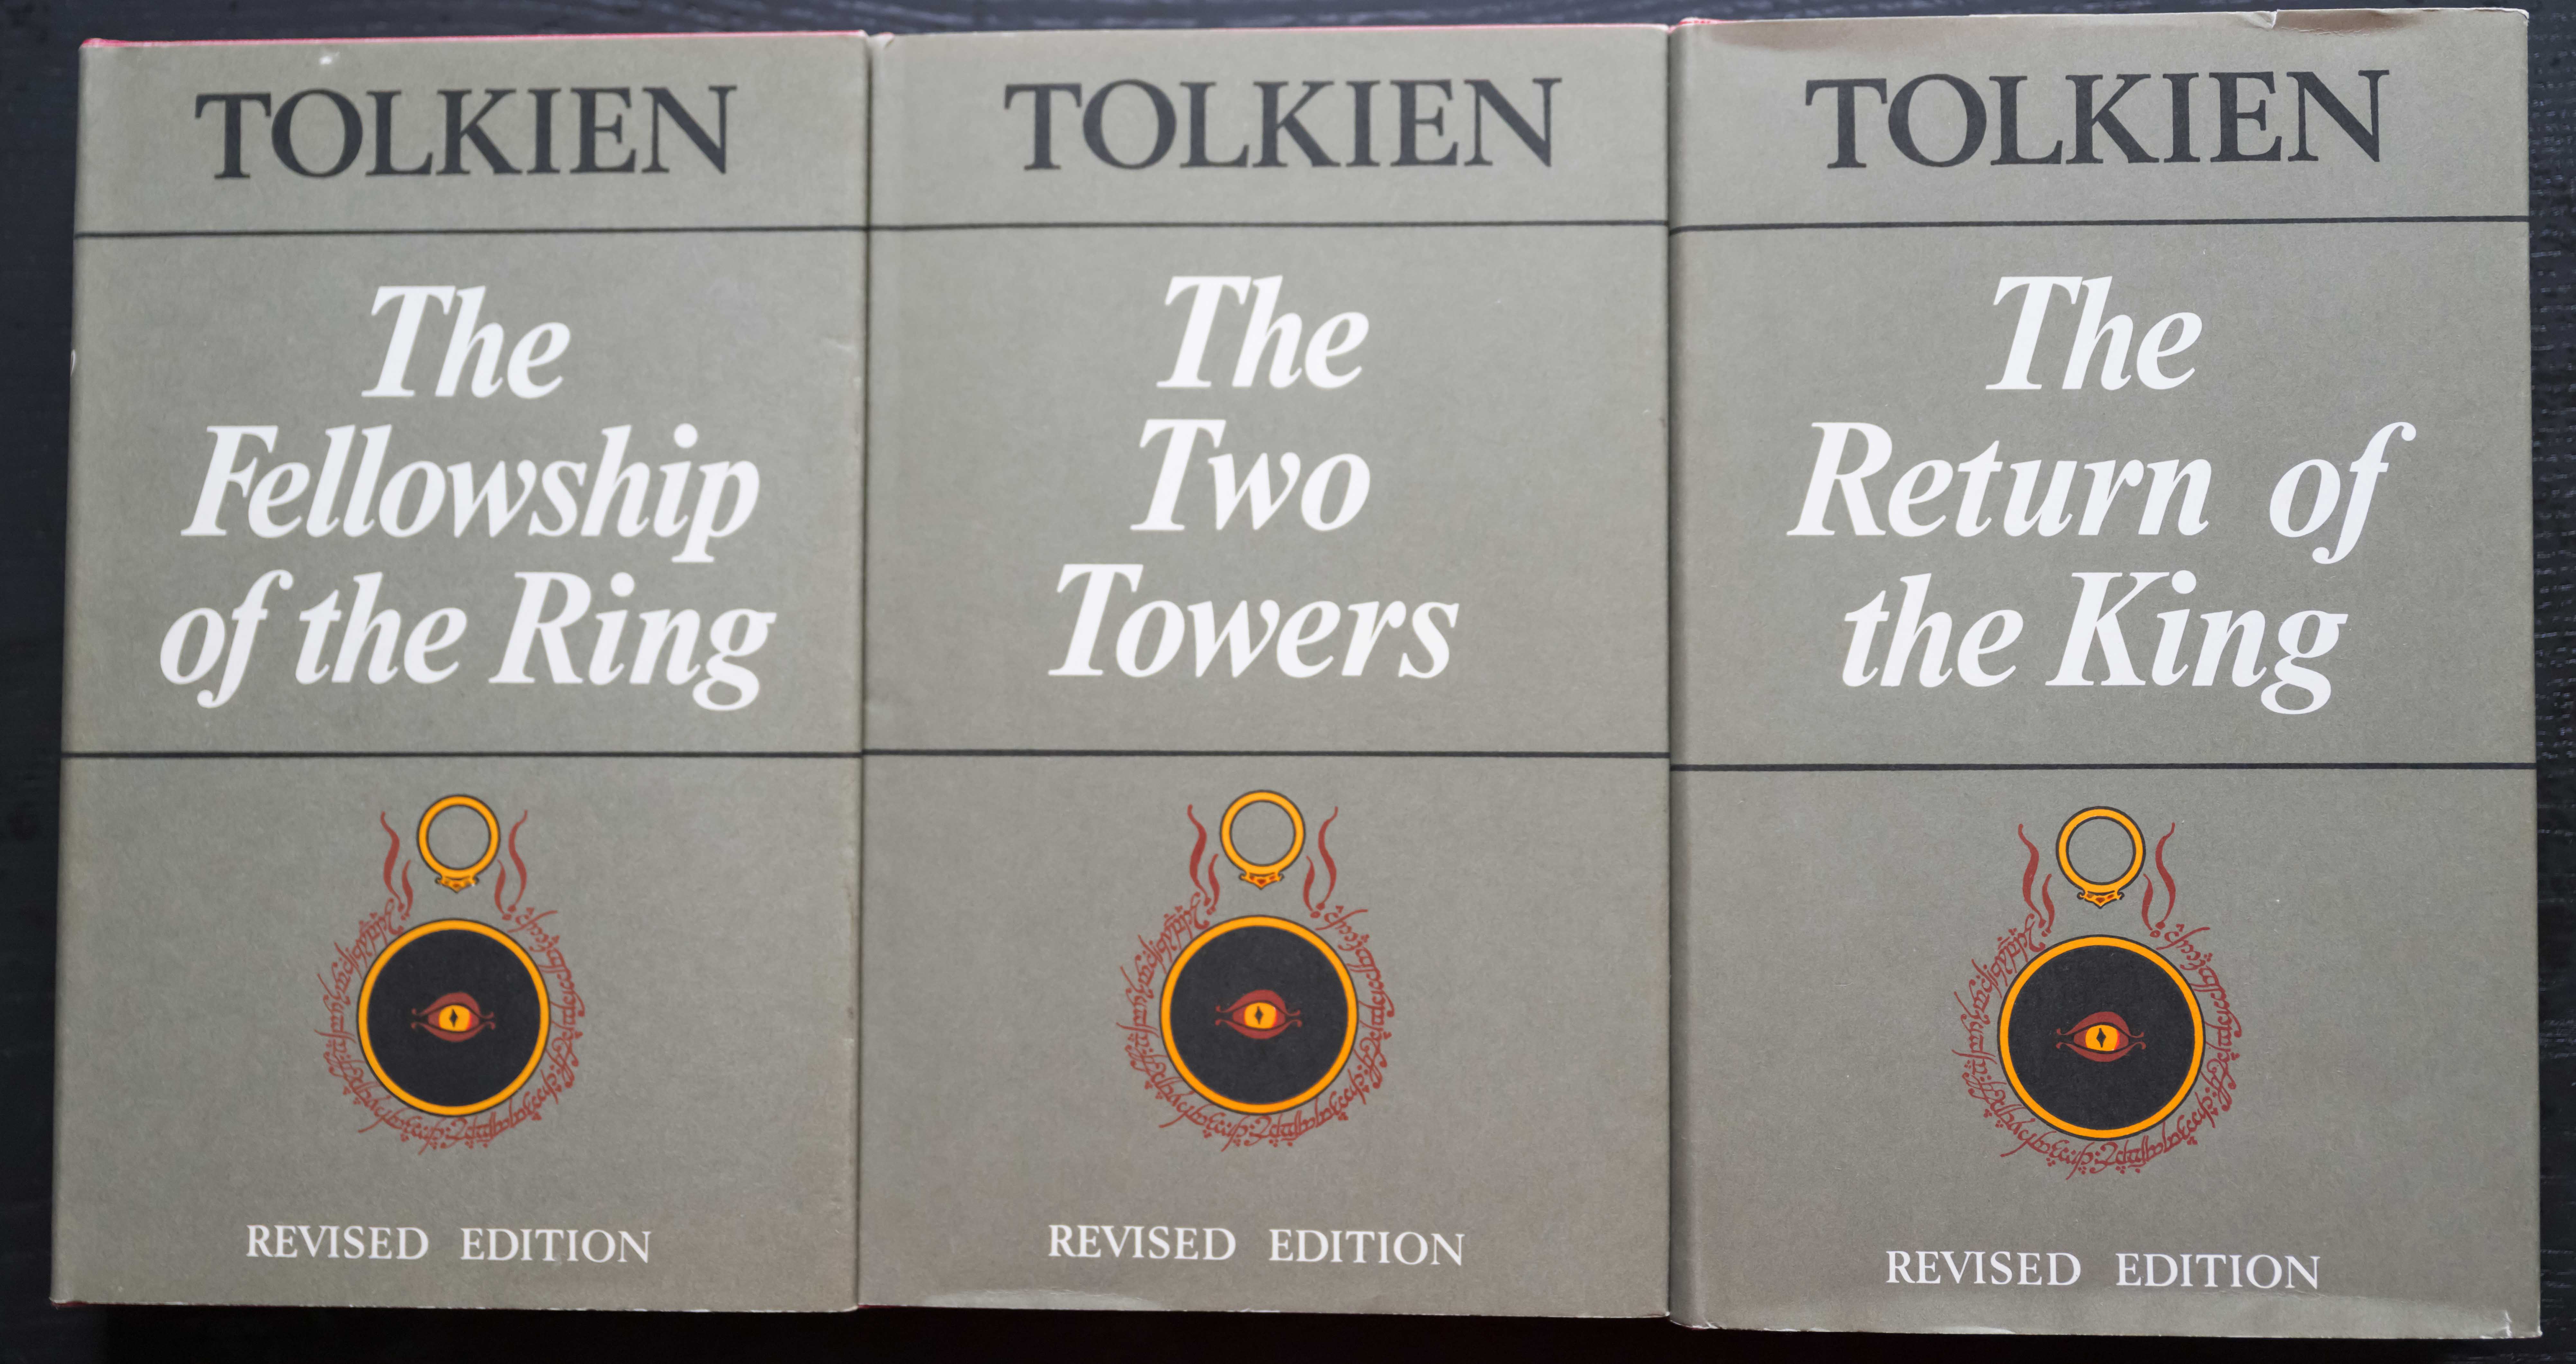 The Lord of the Rings, 2nd UK Edition, 7th Impressions